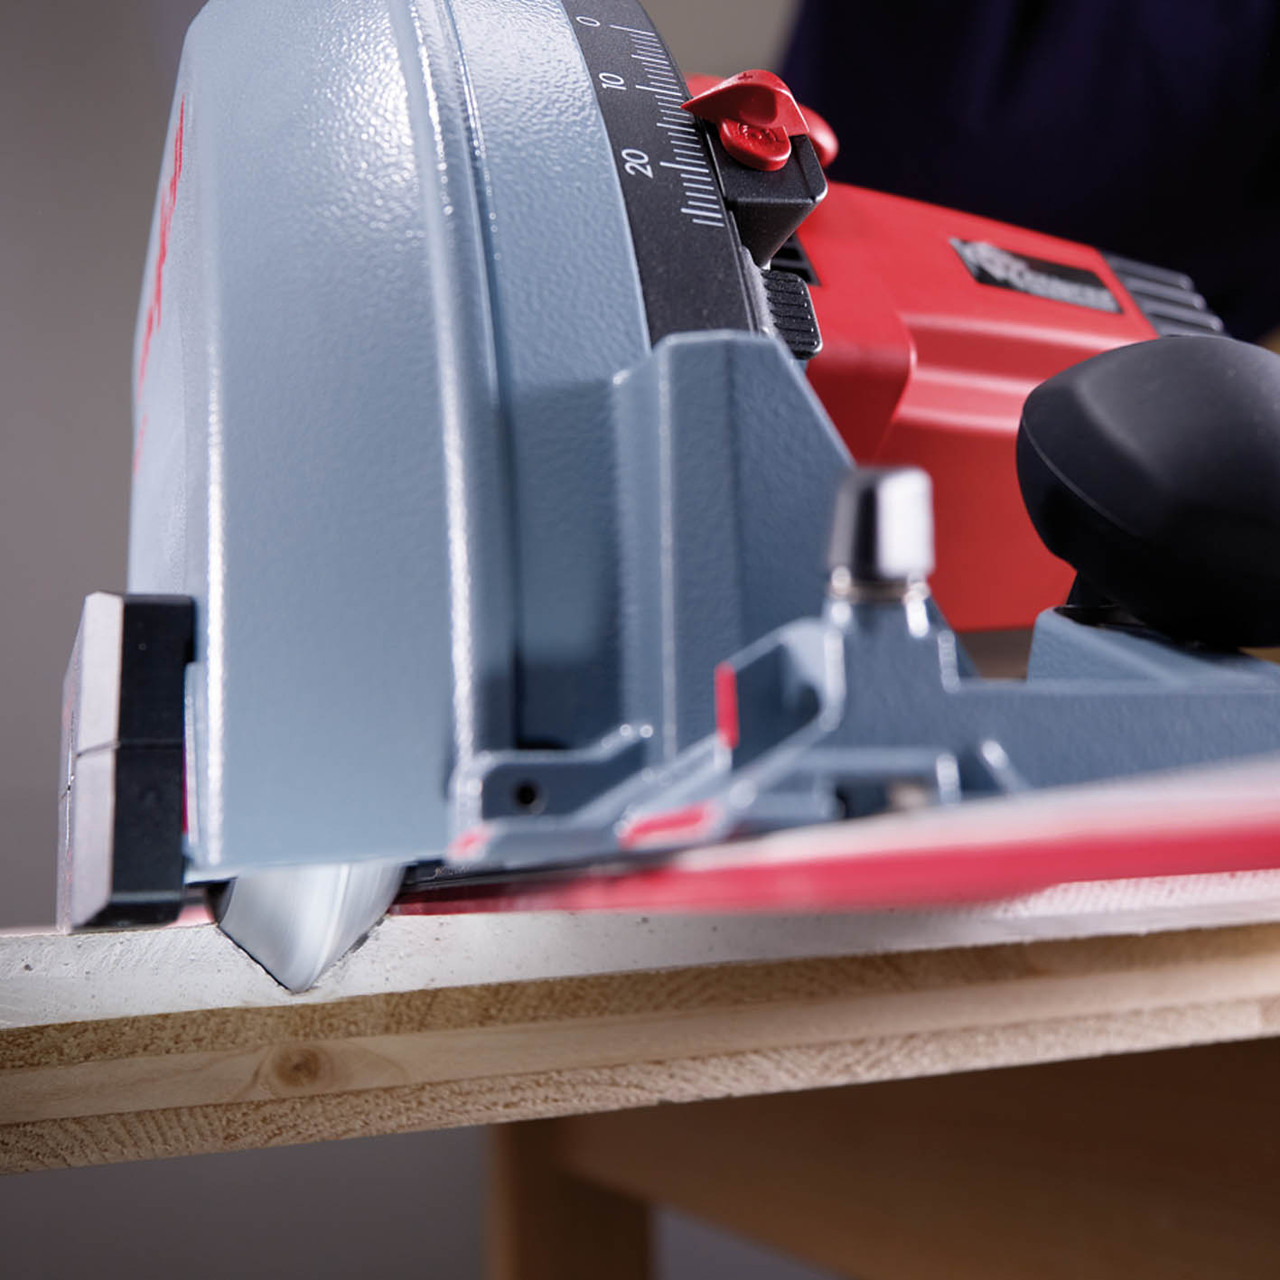 Buy Online a Groove Cutter from MAFELL 1400w Groove Cutter in Systainer T-Max with 1400w Groove Cutter for the Furniture Making and Woodworking Industry and Carpenters in Australia and New Zealand